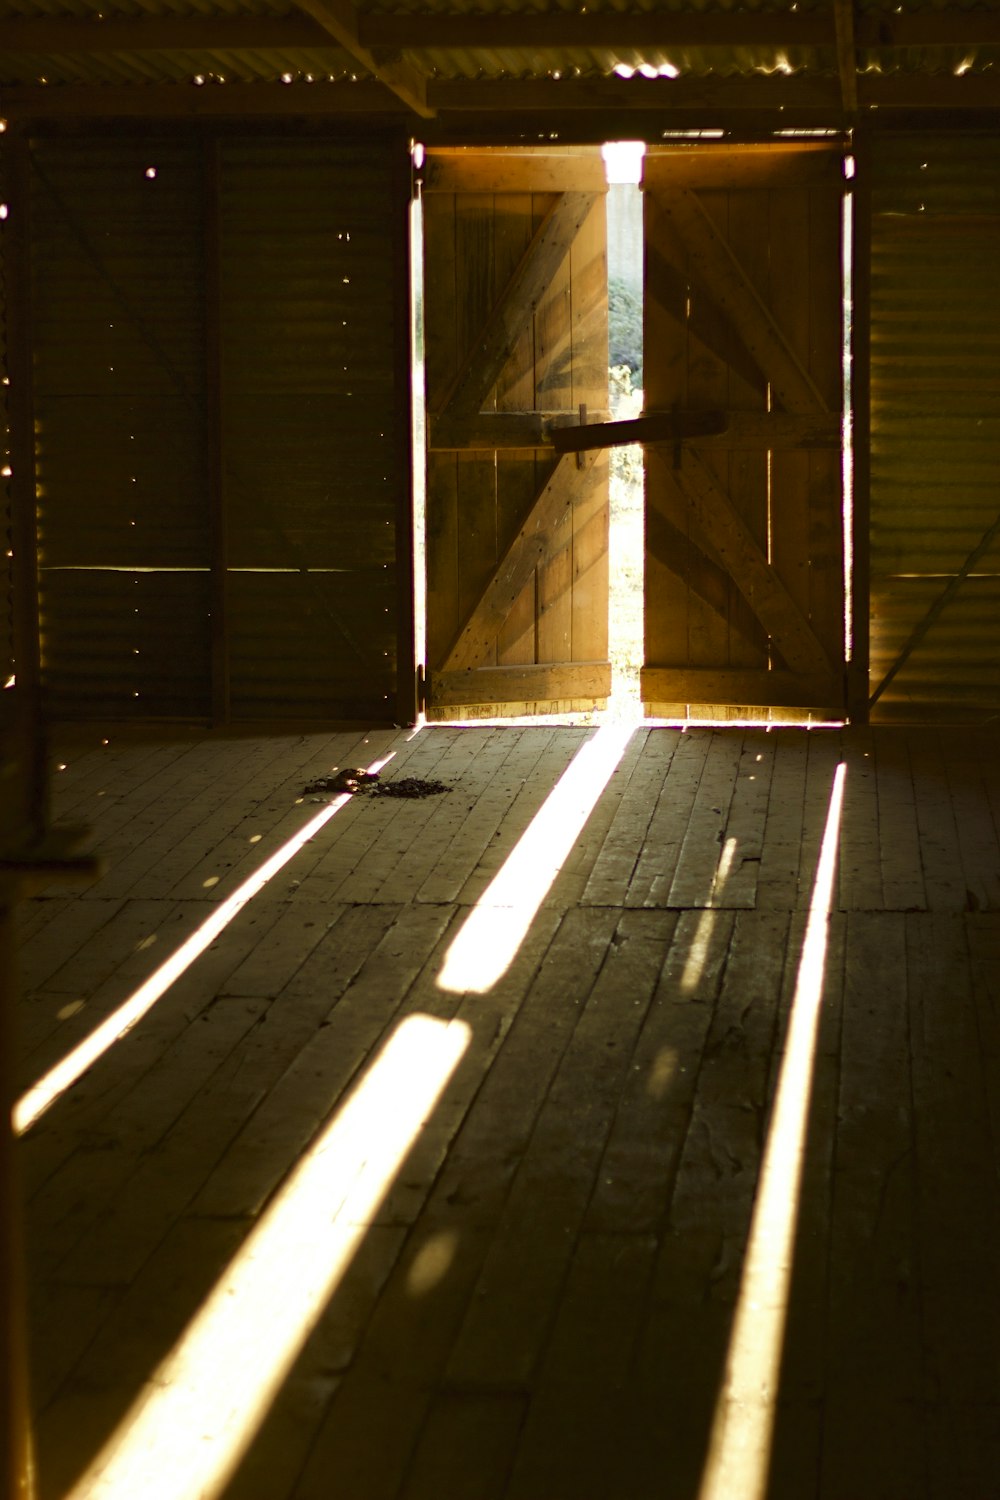 the sun is shining through the open doors of a building